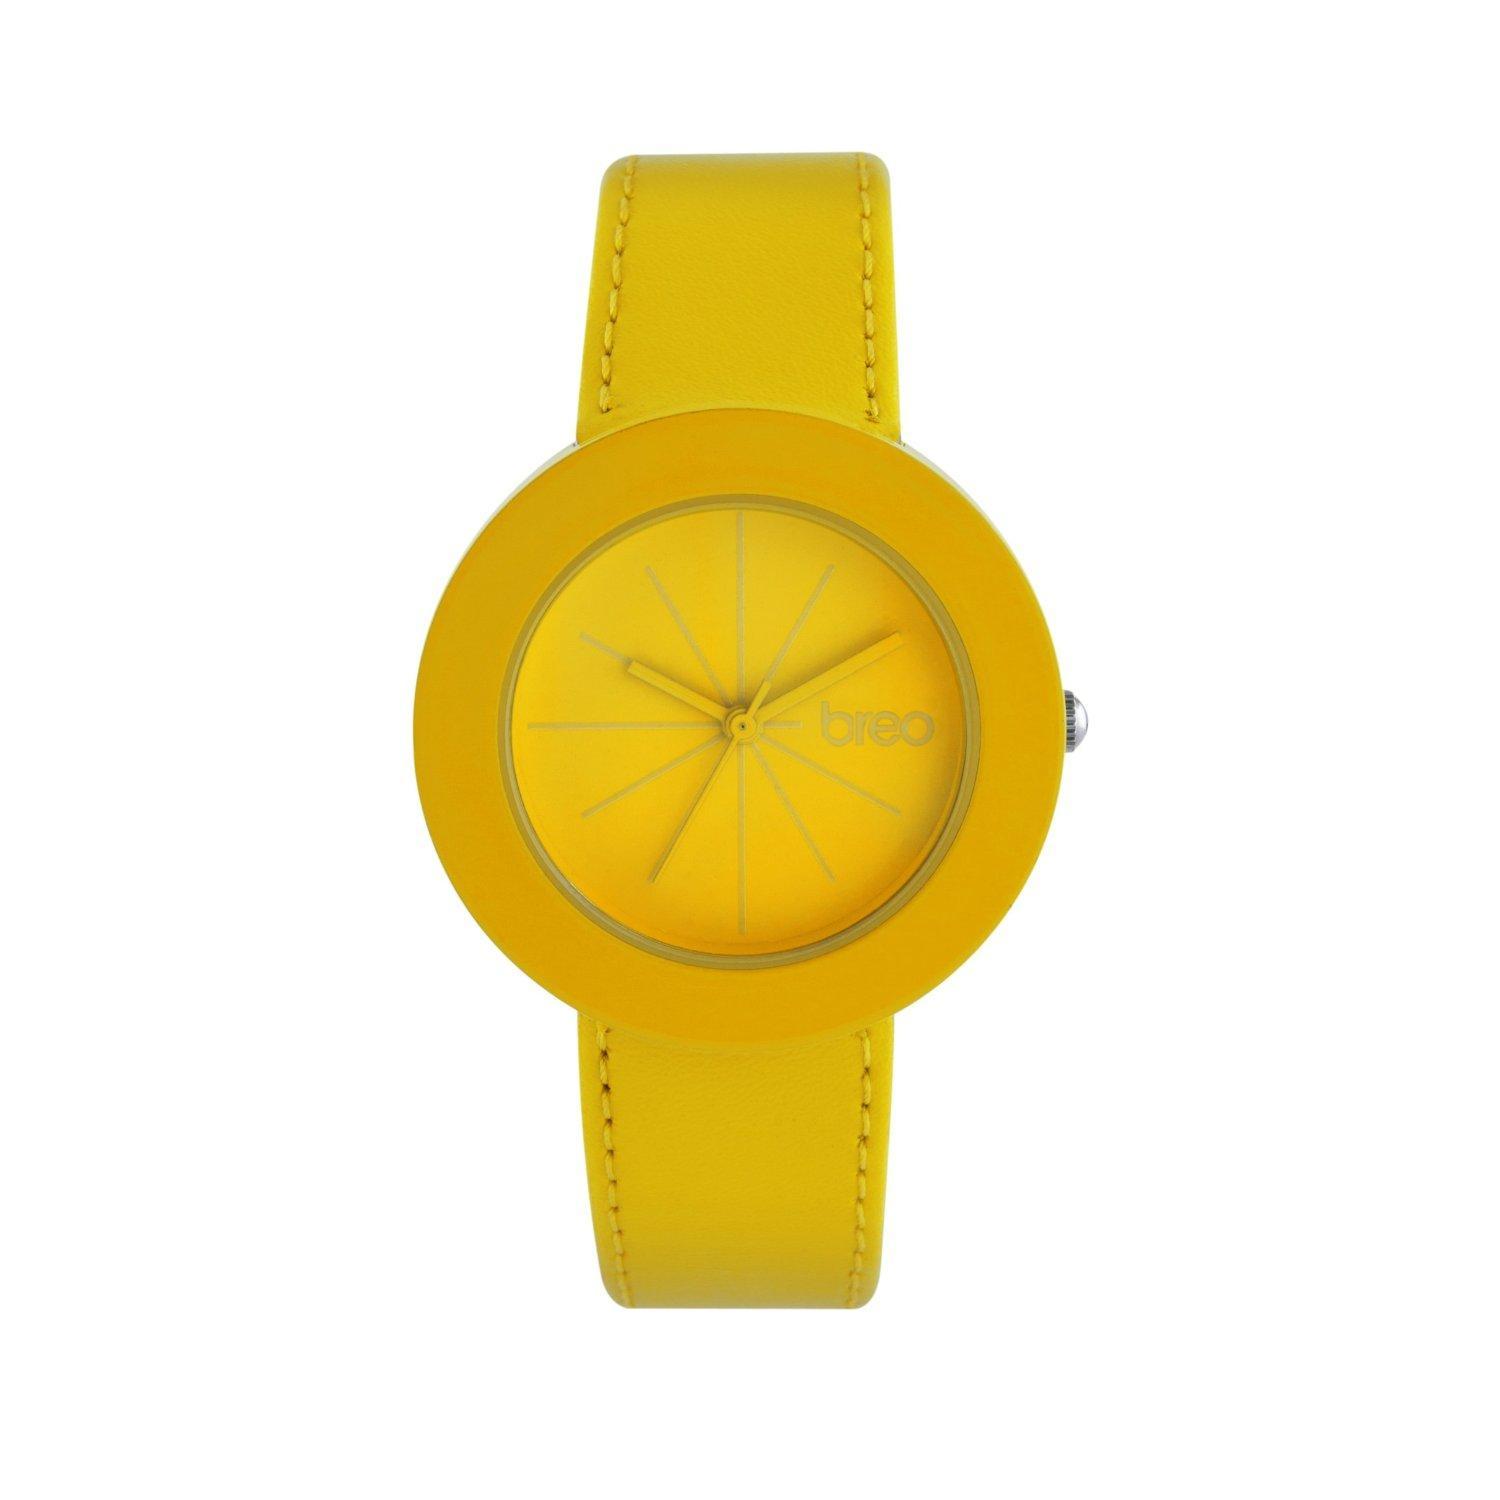 Foto Breo Lima LM6 Unisex Watch Yellow Leather Strap & Dial